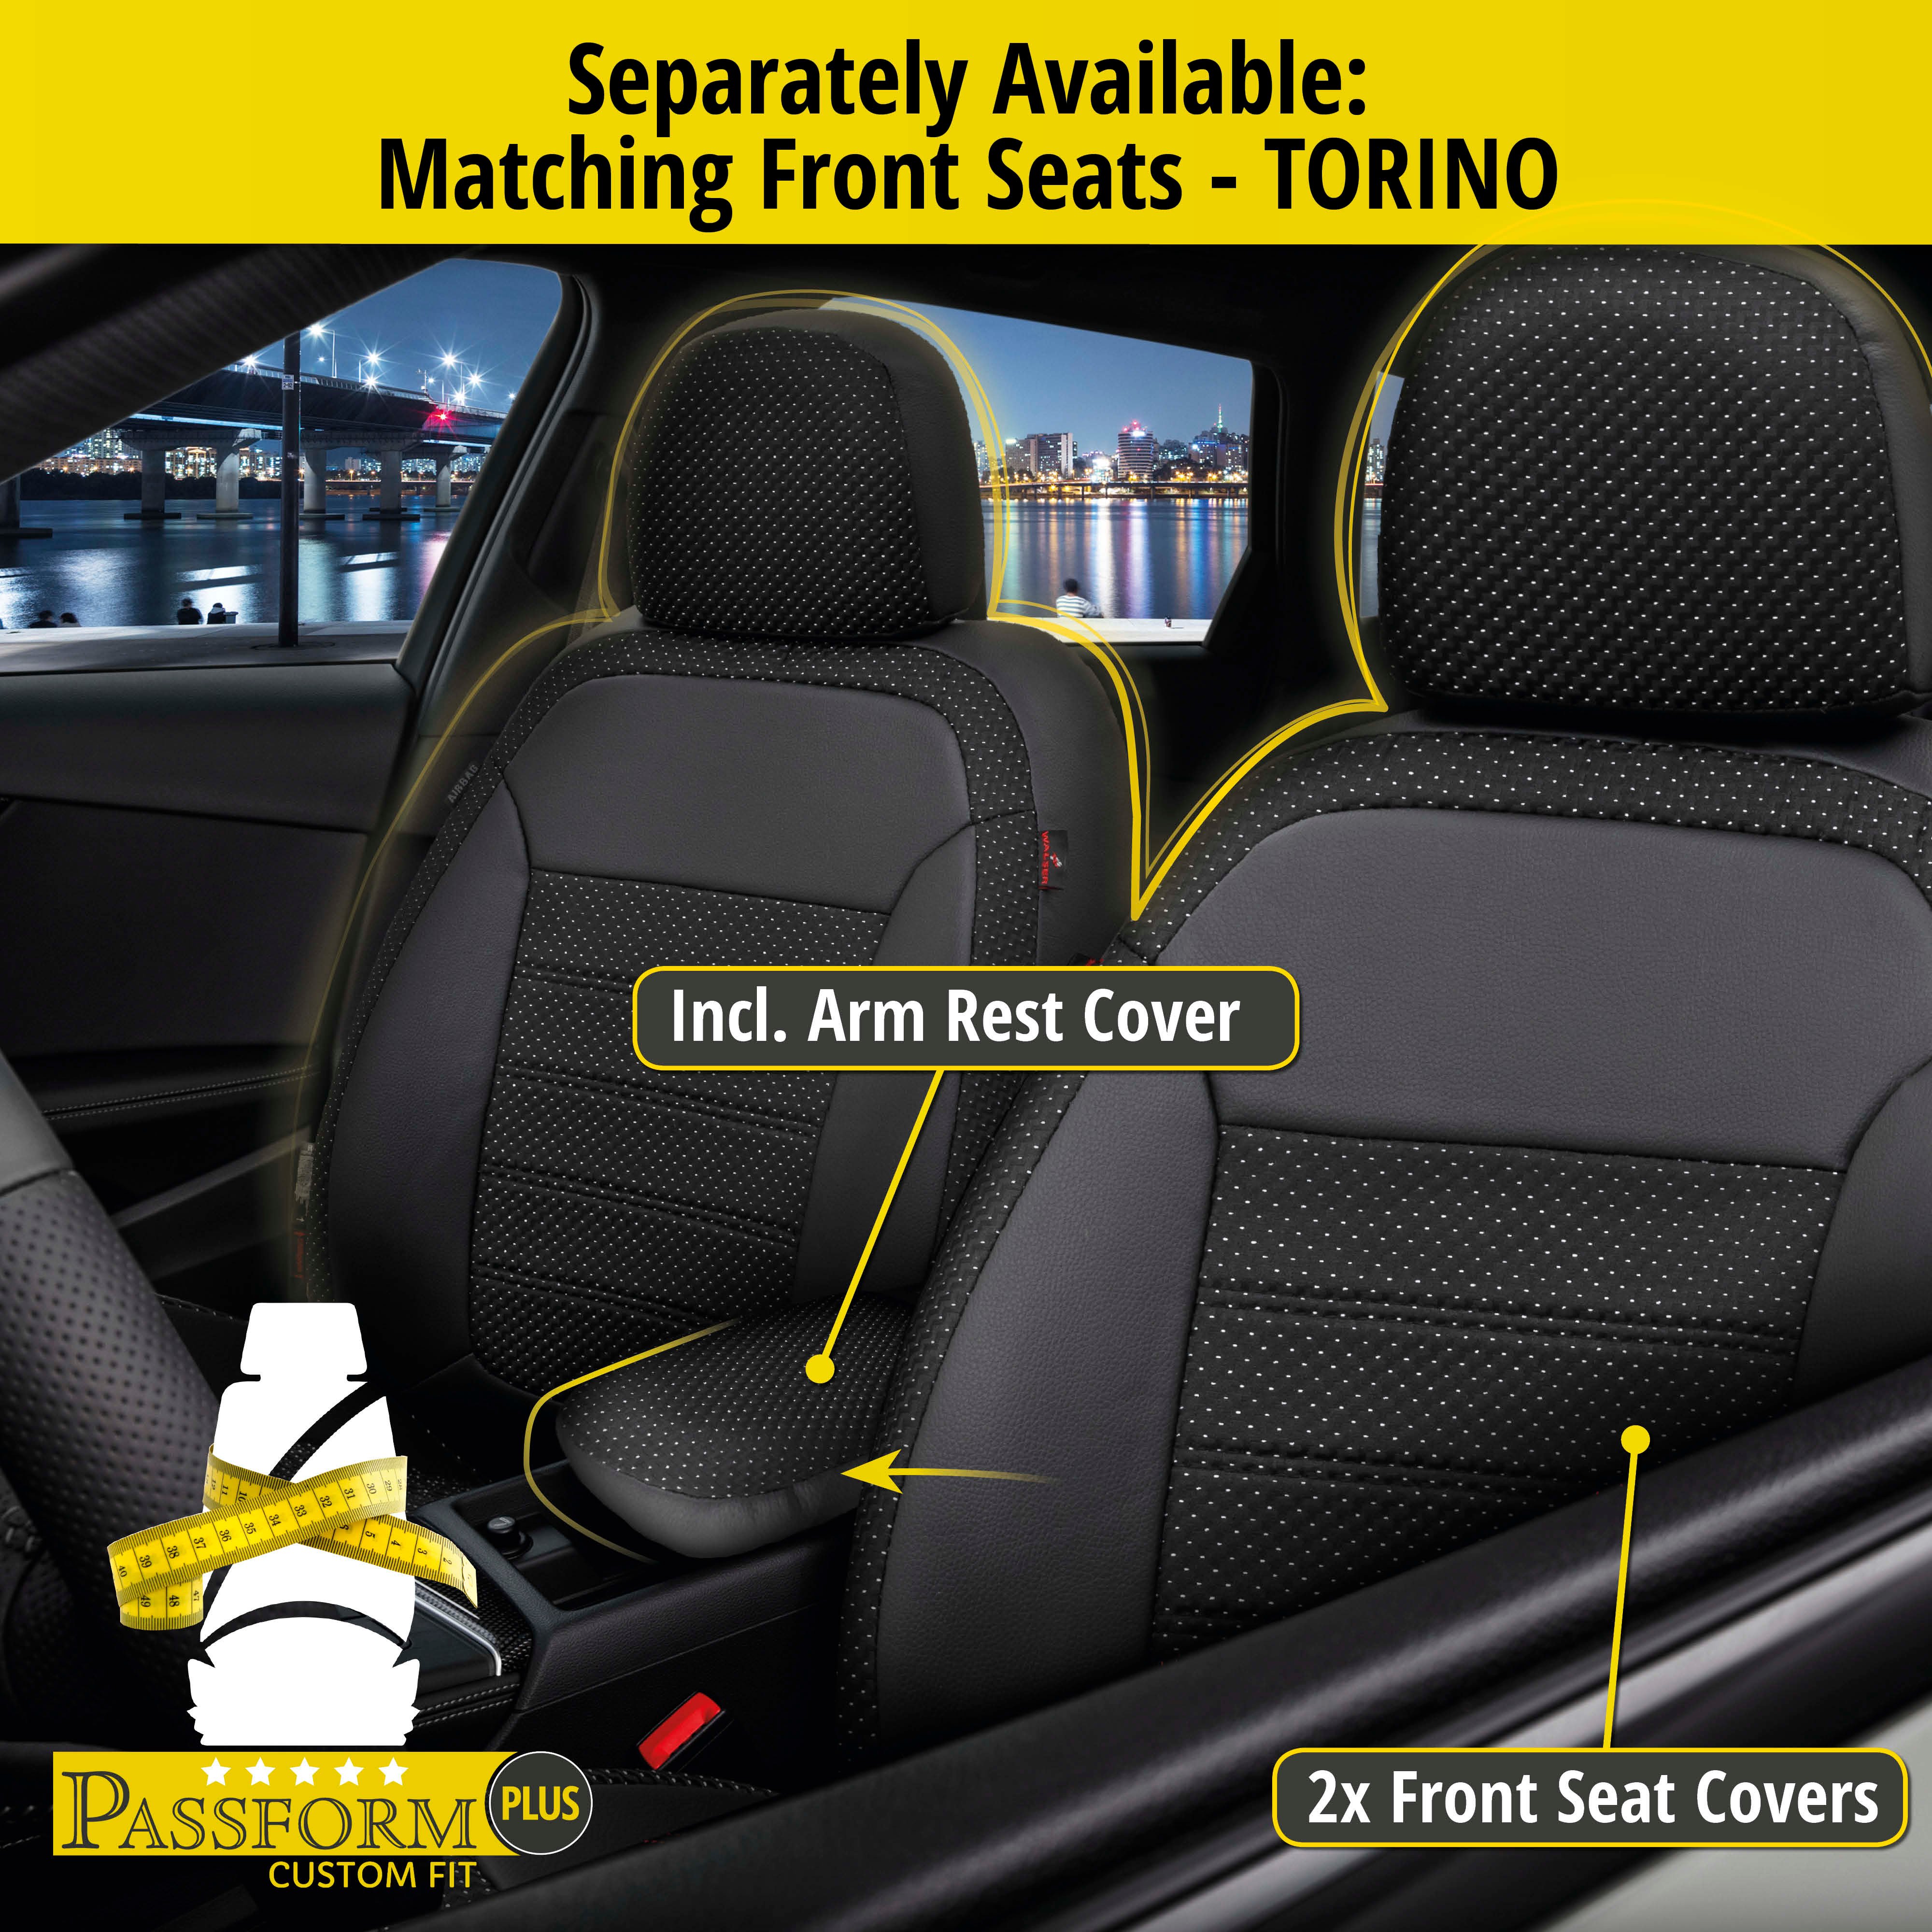 Seat cover Torino for Seat Leon 2013-Today, 1 rear seat cover for normal seats